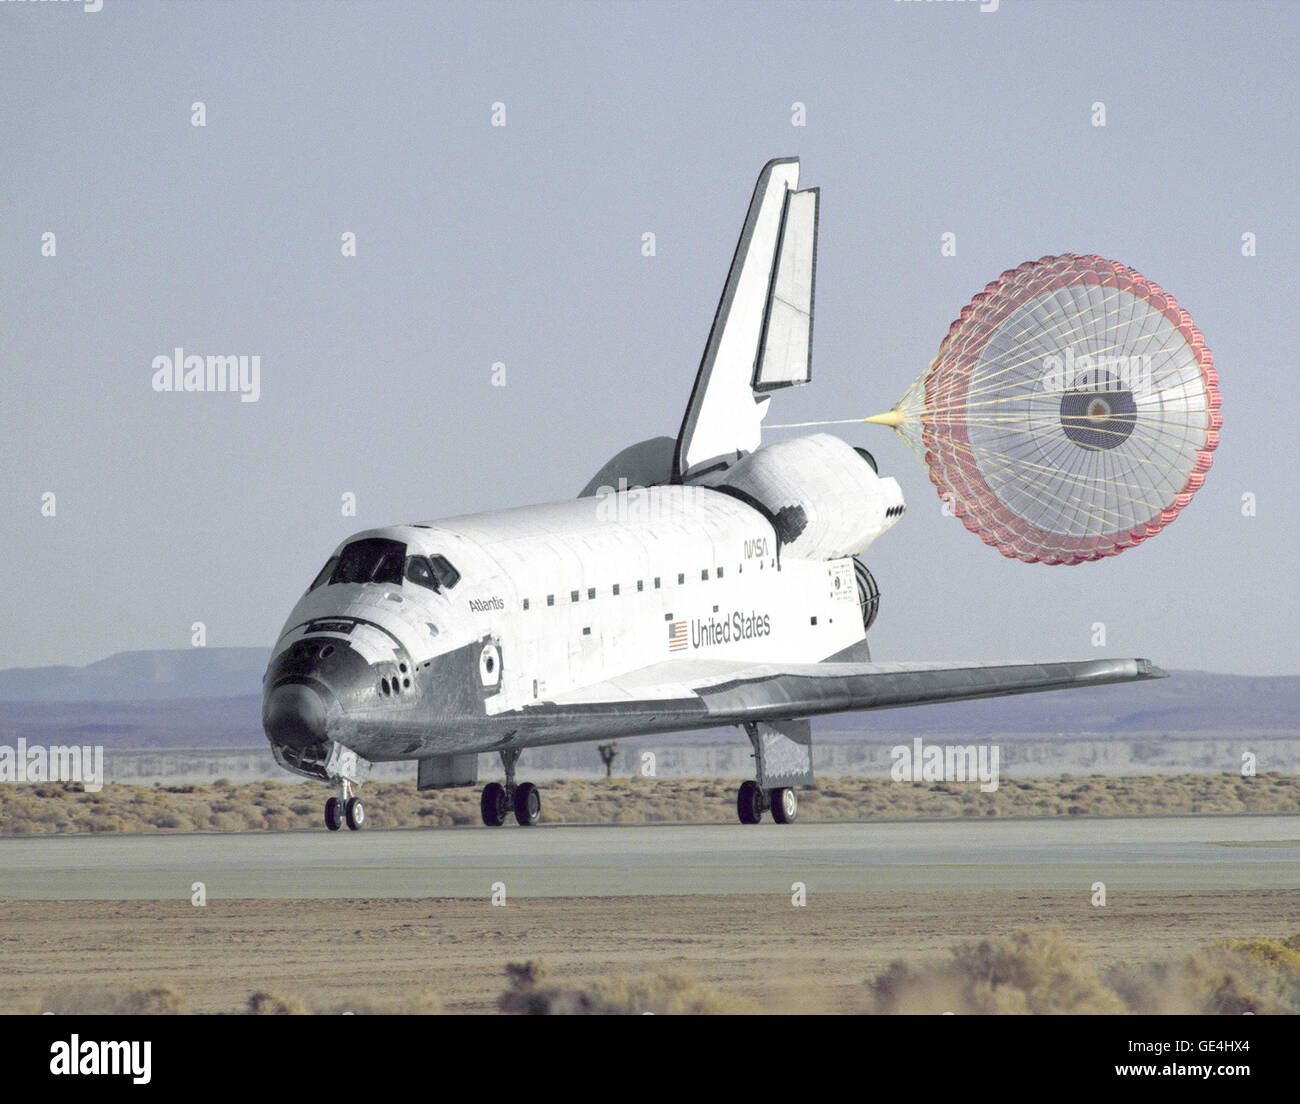 The Space Shuttle Atlantis lands with its drag chute deployed on runway 22 at Edwards, California, to complete the STS-66 mission dedicated to the third flight of the Atmospheric Laboratory for Applications and Science-3 (ATLAS-3), part of NASA's Mission to Planet Earth program. The astronauts also deployed and retrieved a free-flying satellite designed to study the middle and lower thermospheres and perform a series of experiments covering life sciences research and microgravity processing. The landing was at 7:34 a.m. (PST) November 14, 1994, after being waved off from the Kennedy Space Cent Stock Photo